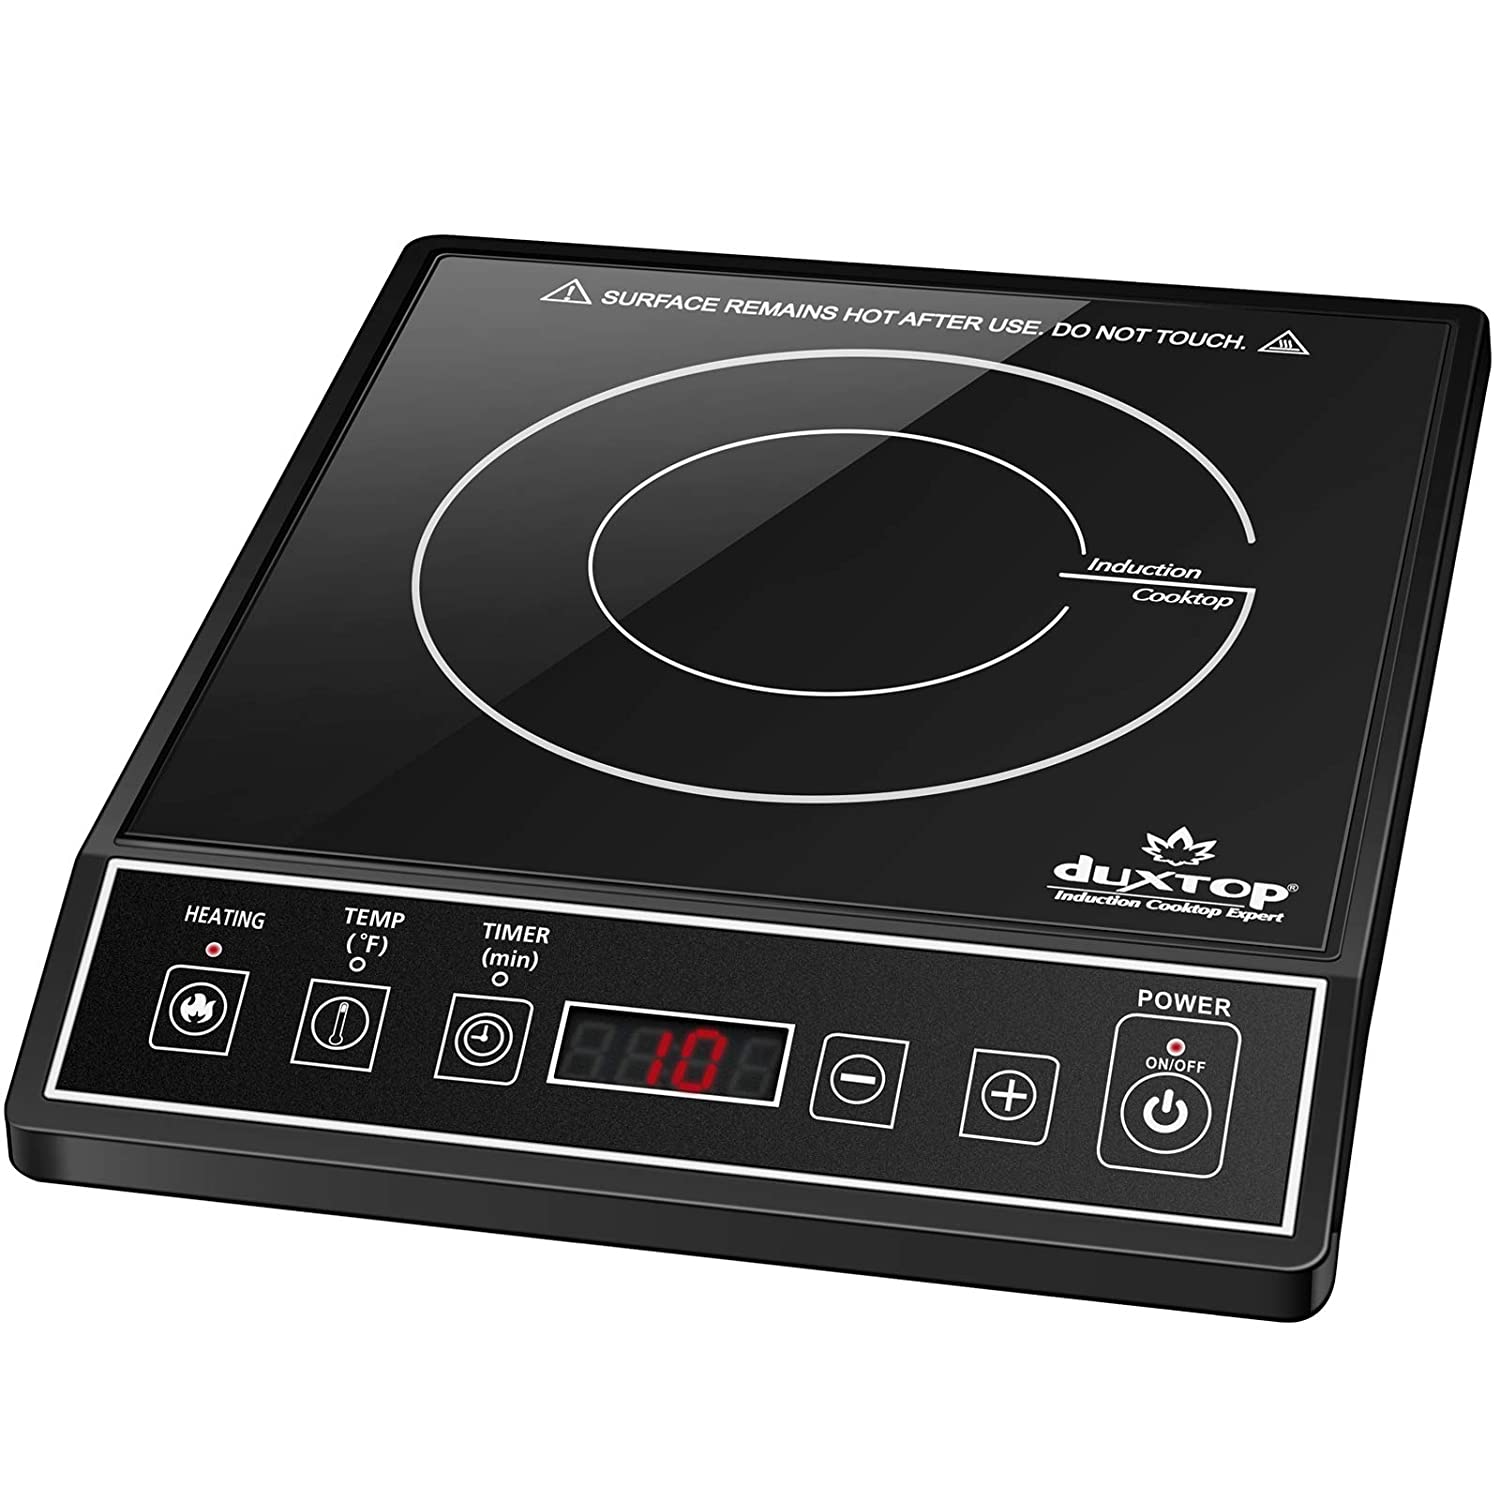 Hot plate - Secura 9100MC 1800W Portable Induction Cooktop